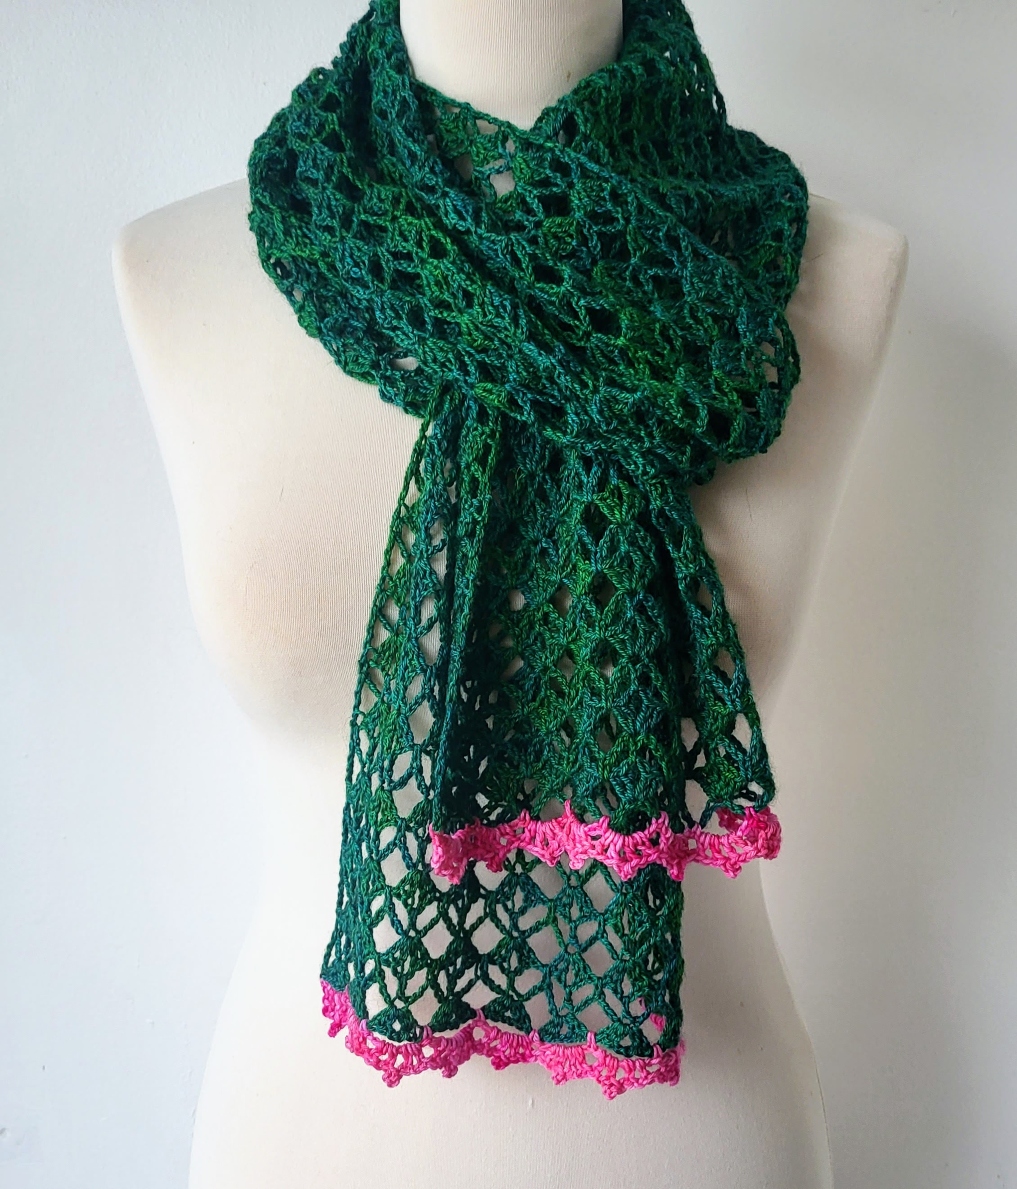 green lace scarf tied at the neck with a hot pink edging